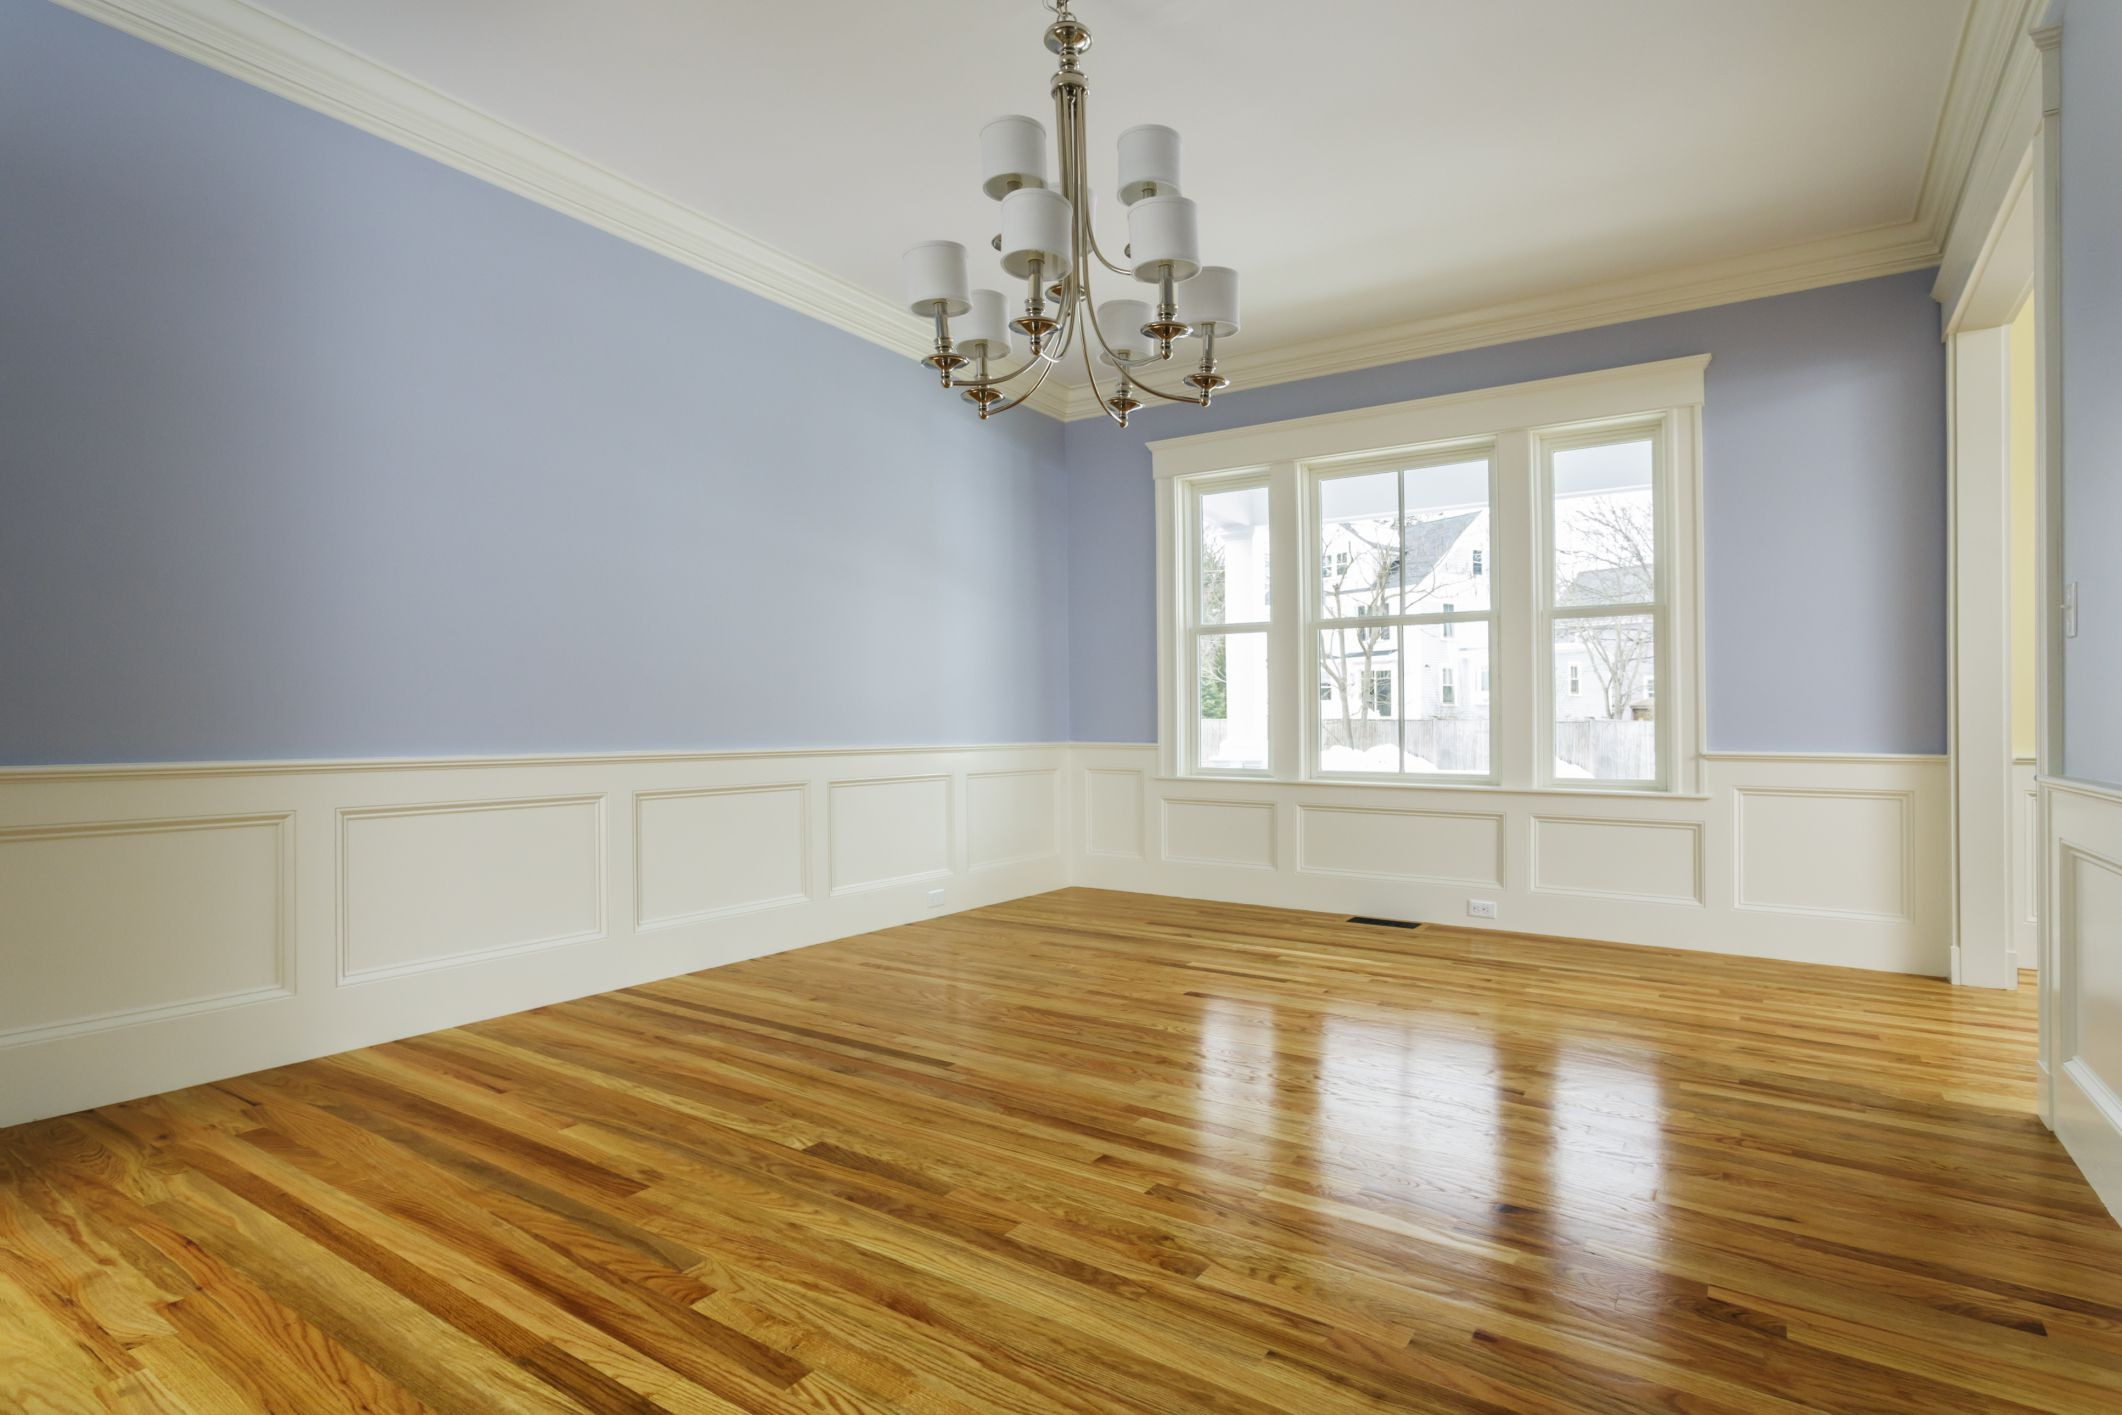 24 Ideal How to Clean Prefinished Hardwood Floors with Steam 2024 free download how to clean prefinished hardwood floors with steam of how to make hardwood floors shiny with 168686572 56a4e87c3df78cf7728544a2